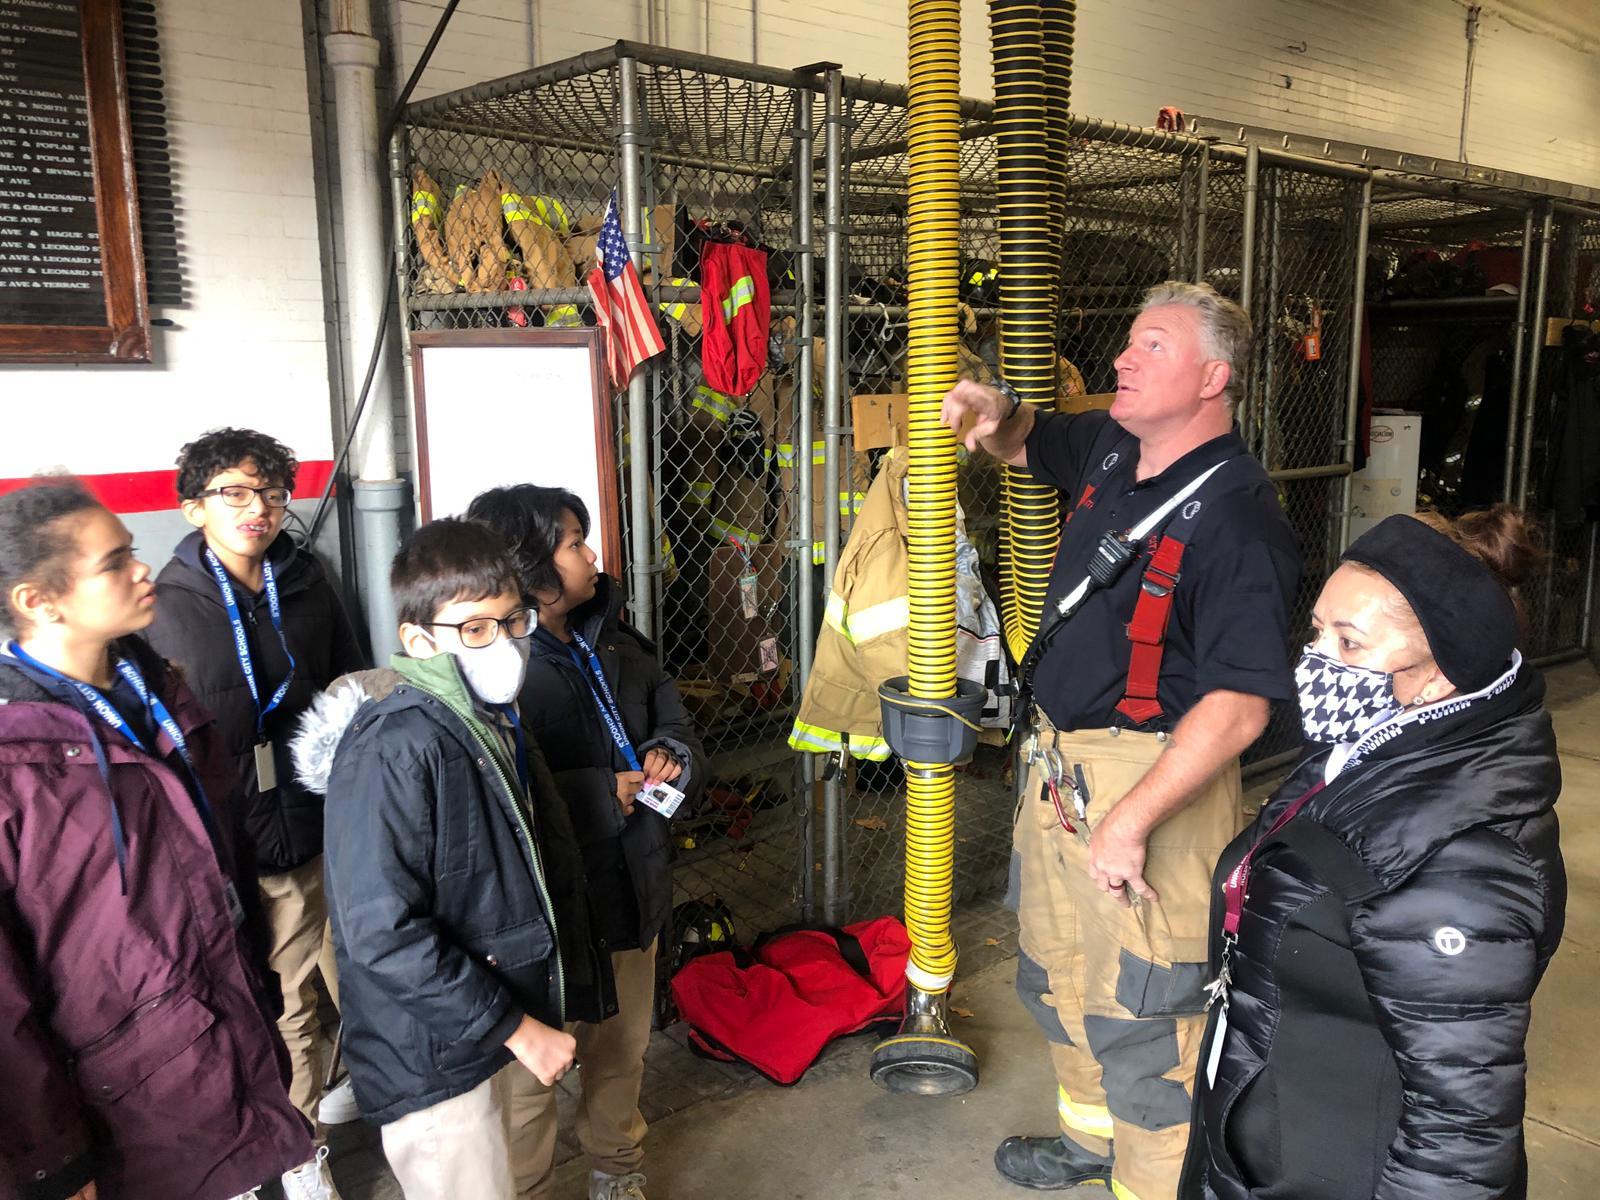 Student learning fire safety